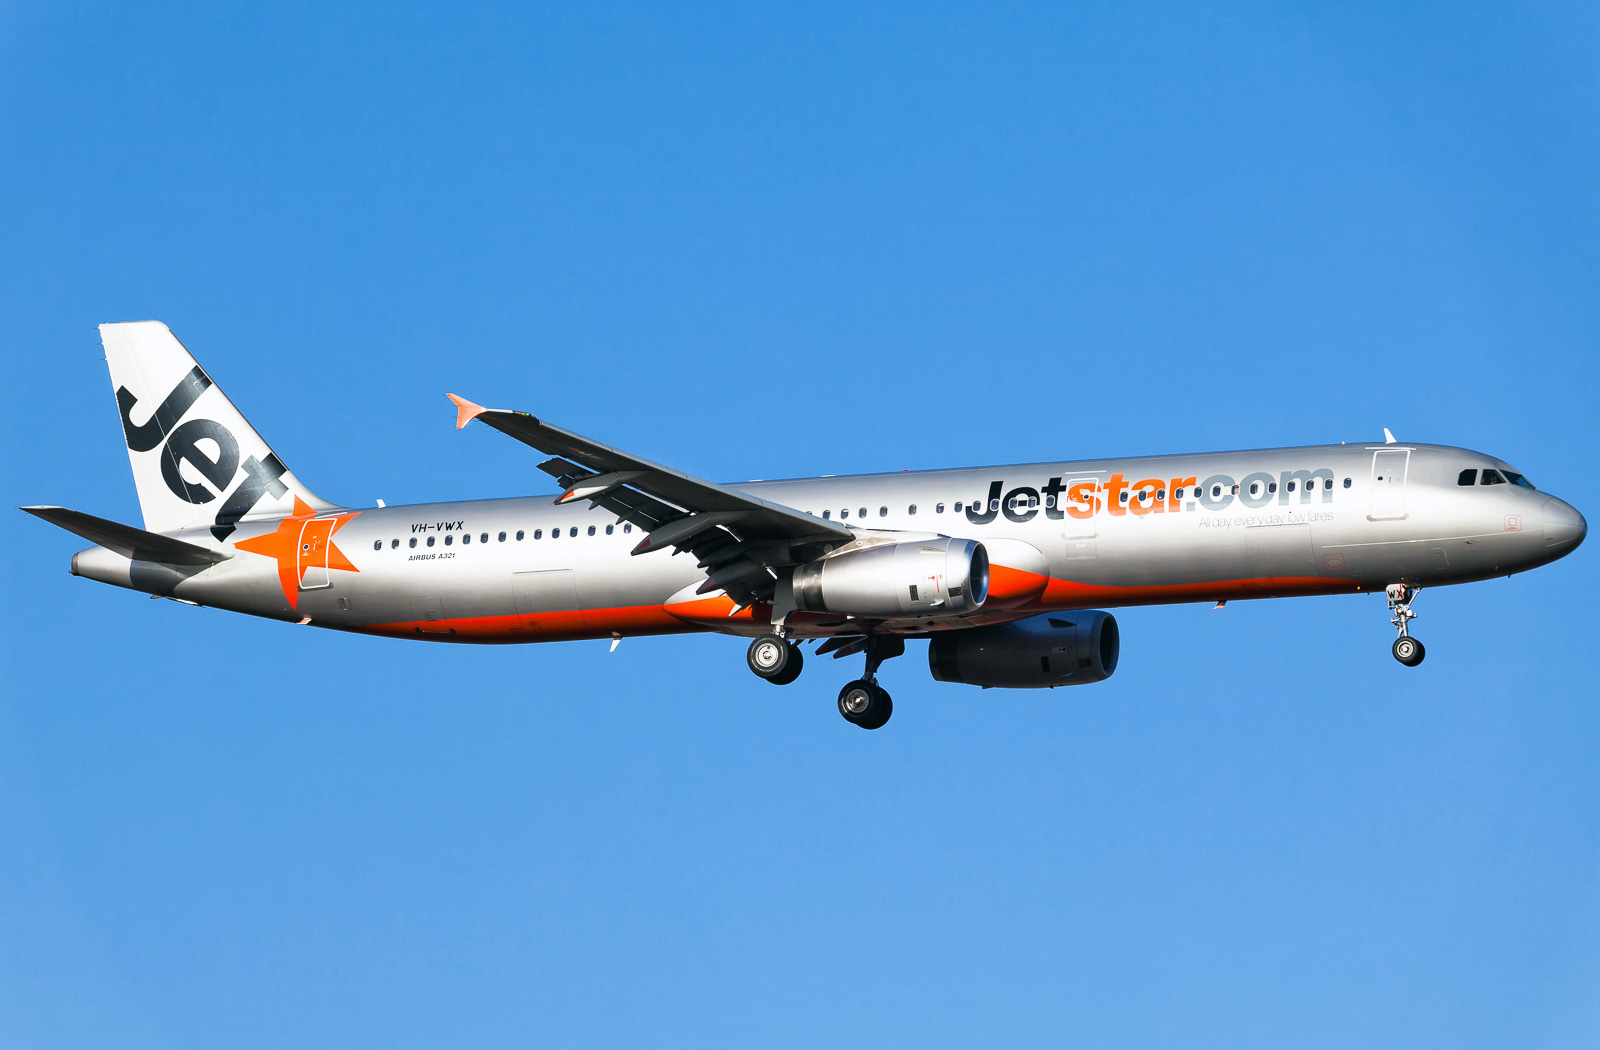 Airbus A321-200 Jetstar. Photos and description of the plane